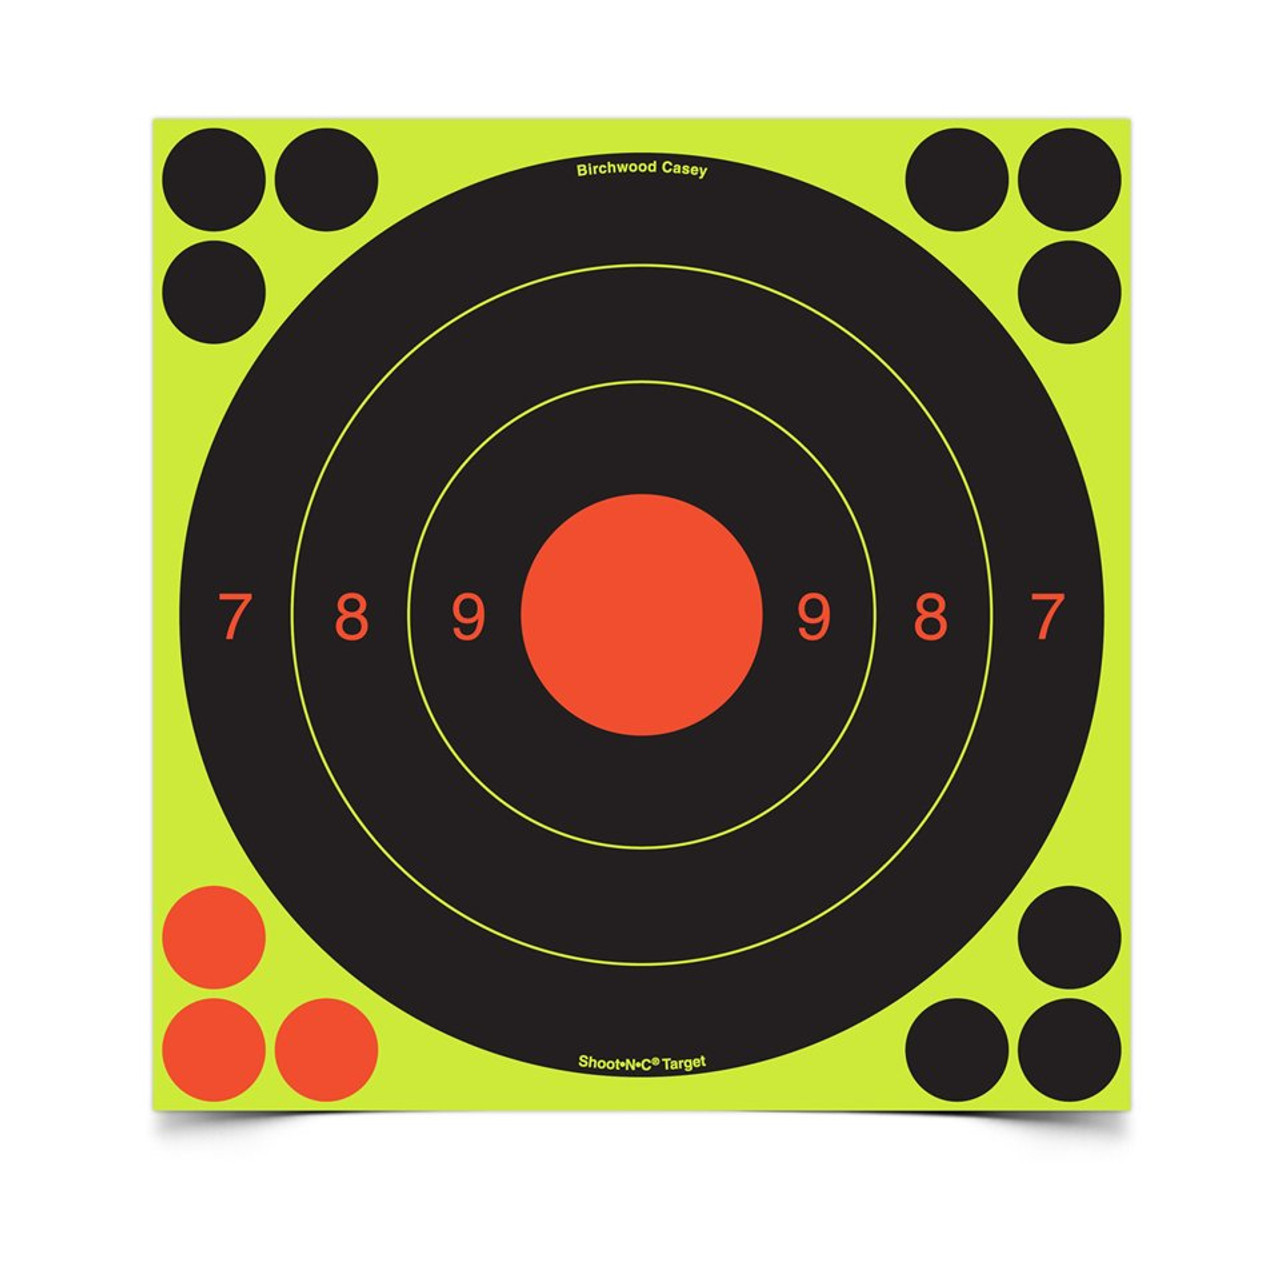 BULLET HOLES ARE REVEALED WITH BRIGHT CHARTREUSE RINGS
SELF-ADHESIVE BACKING MAKES TARGETS EASY TO PUT UP
INSTANT FEEDBACK – NO NEED TO WALK DOWNRANGE OR USE BINOCULARS TO SEE YOUR SHOT
GREAT FOR INDOOR OR OUTDOOR USE AND LOW-LIGHT CONDITIONS

DETAILS
25/50 METER TARGET SPECIFICALLY MADE FOR INTERNATIONAL CUSTOMERS. TARGET SIZE CONFORMS TO ISSF DIMENSIONS. ENGLISH, FRENCH, GERMAN AND SPANISH LANGUAGES ON PACKAGE.

34081 - SHOOT•N•C® 20 CM UIT, 6 TARGETS - 72 PASTERS